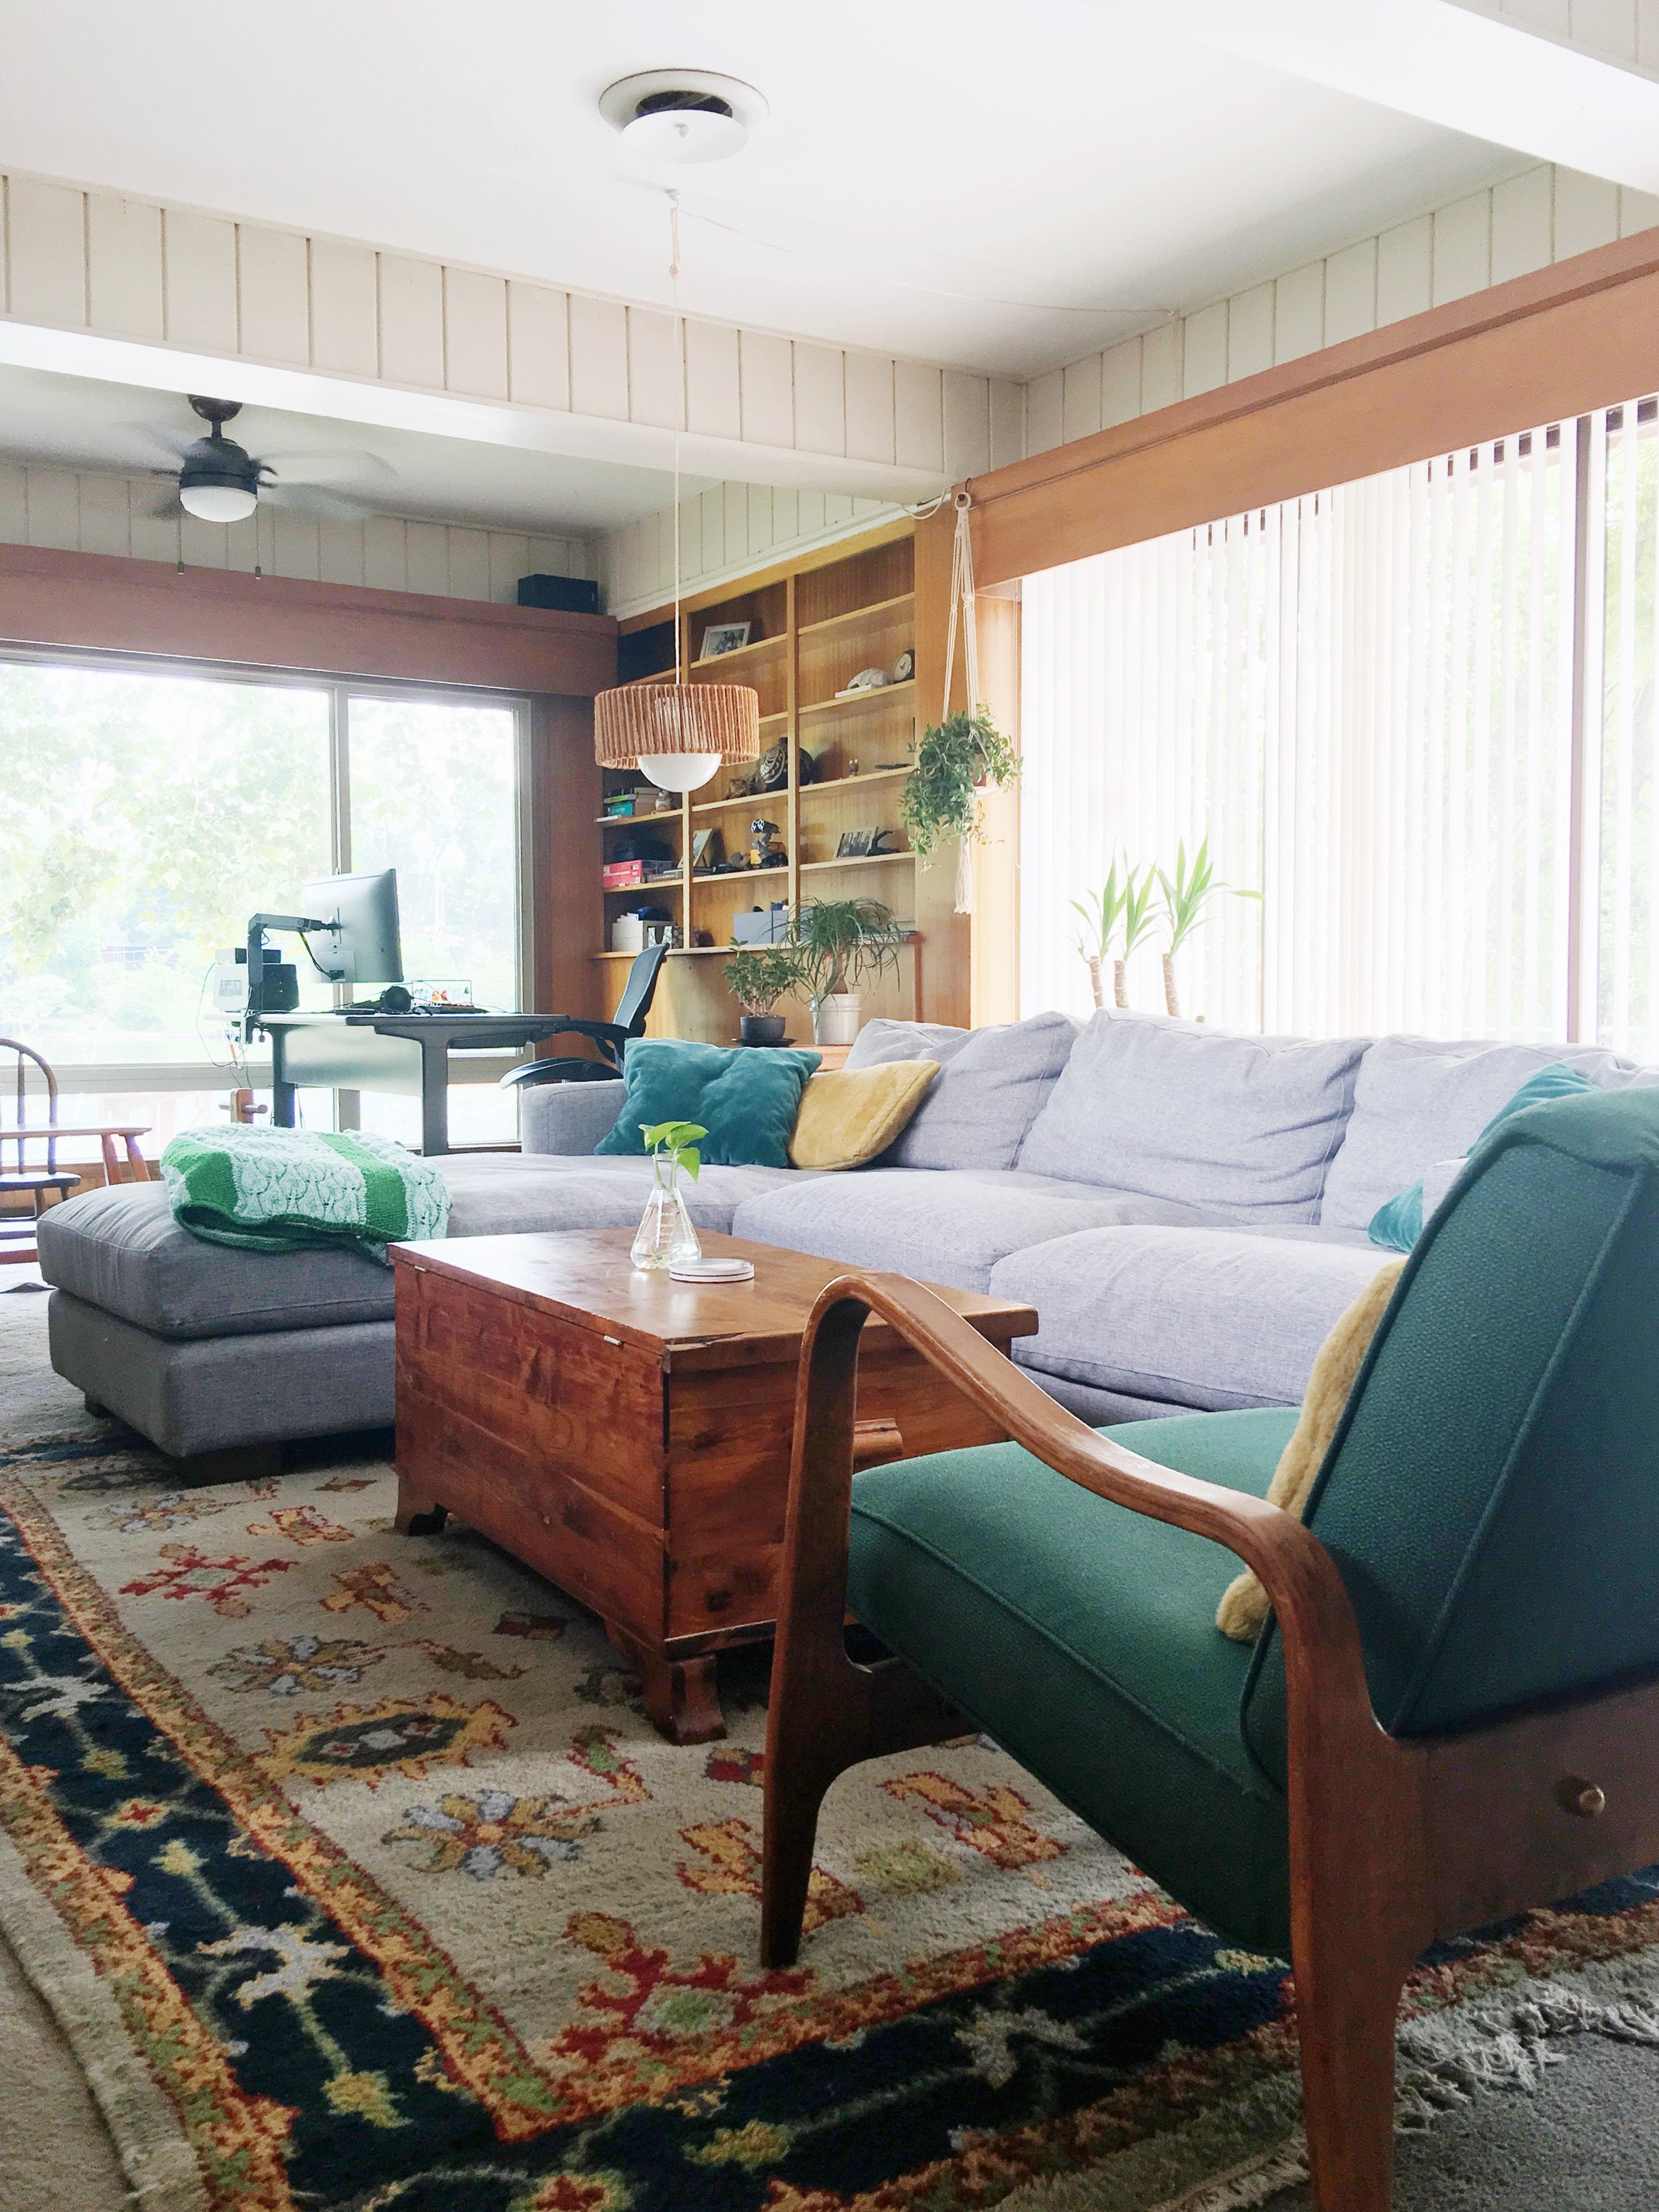 Maintaining Mid-Century Modern Vibes in Complete Remodel